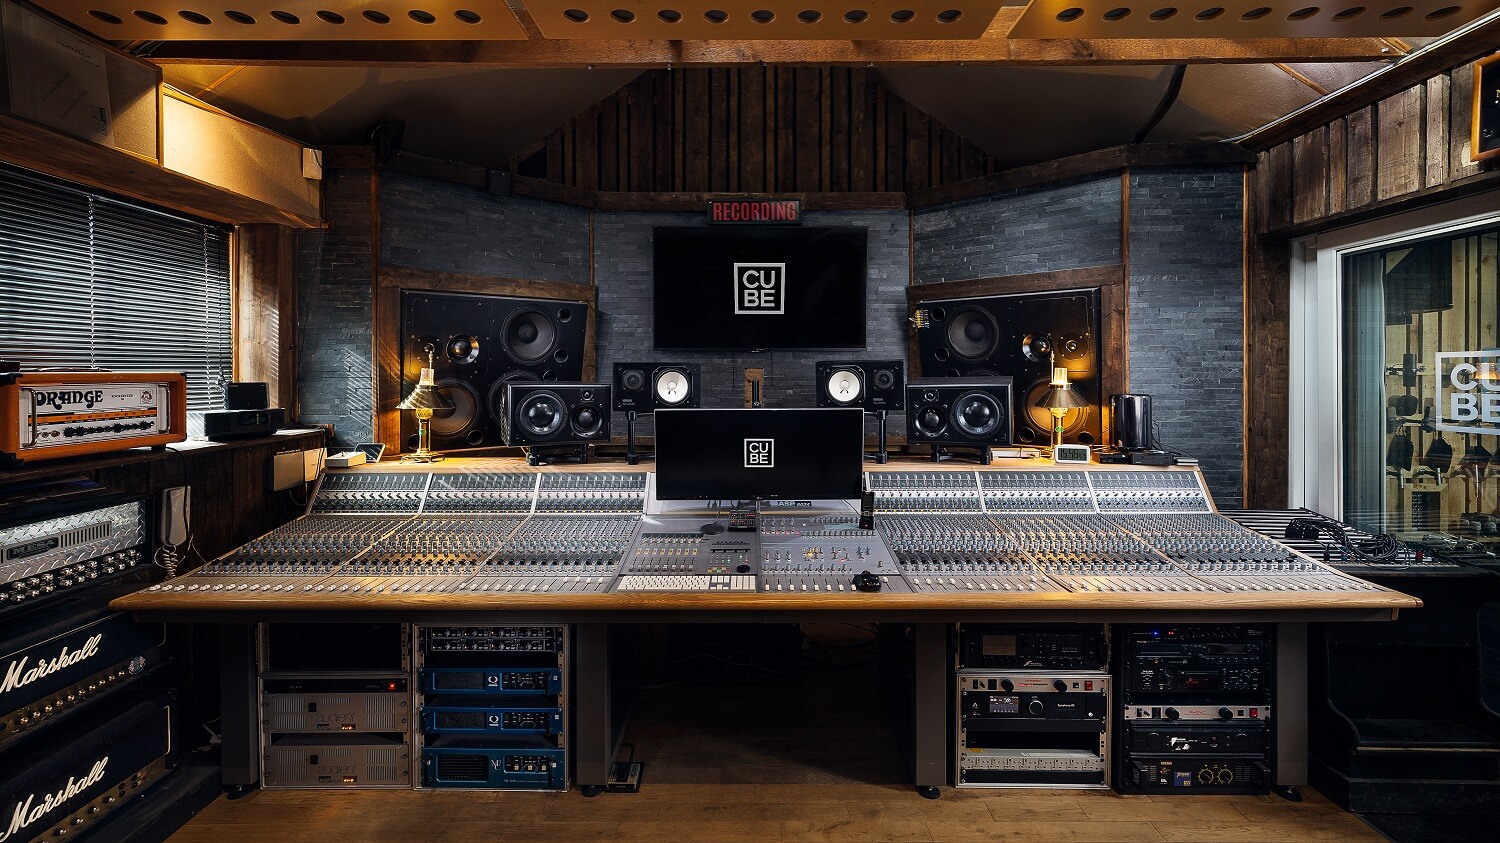 72 channel mixing console in a stunning studio setting